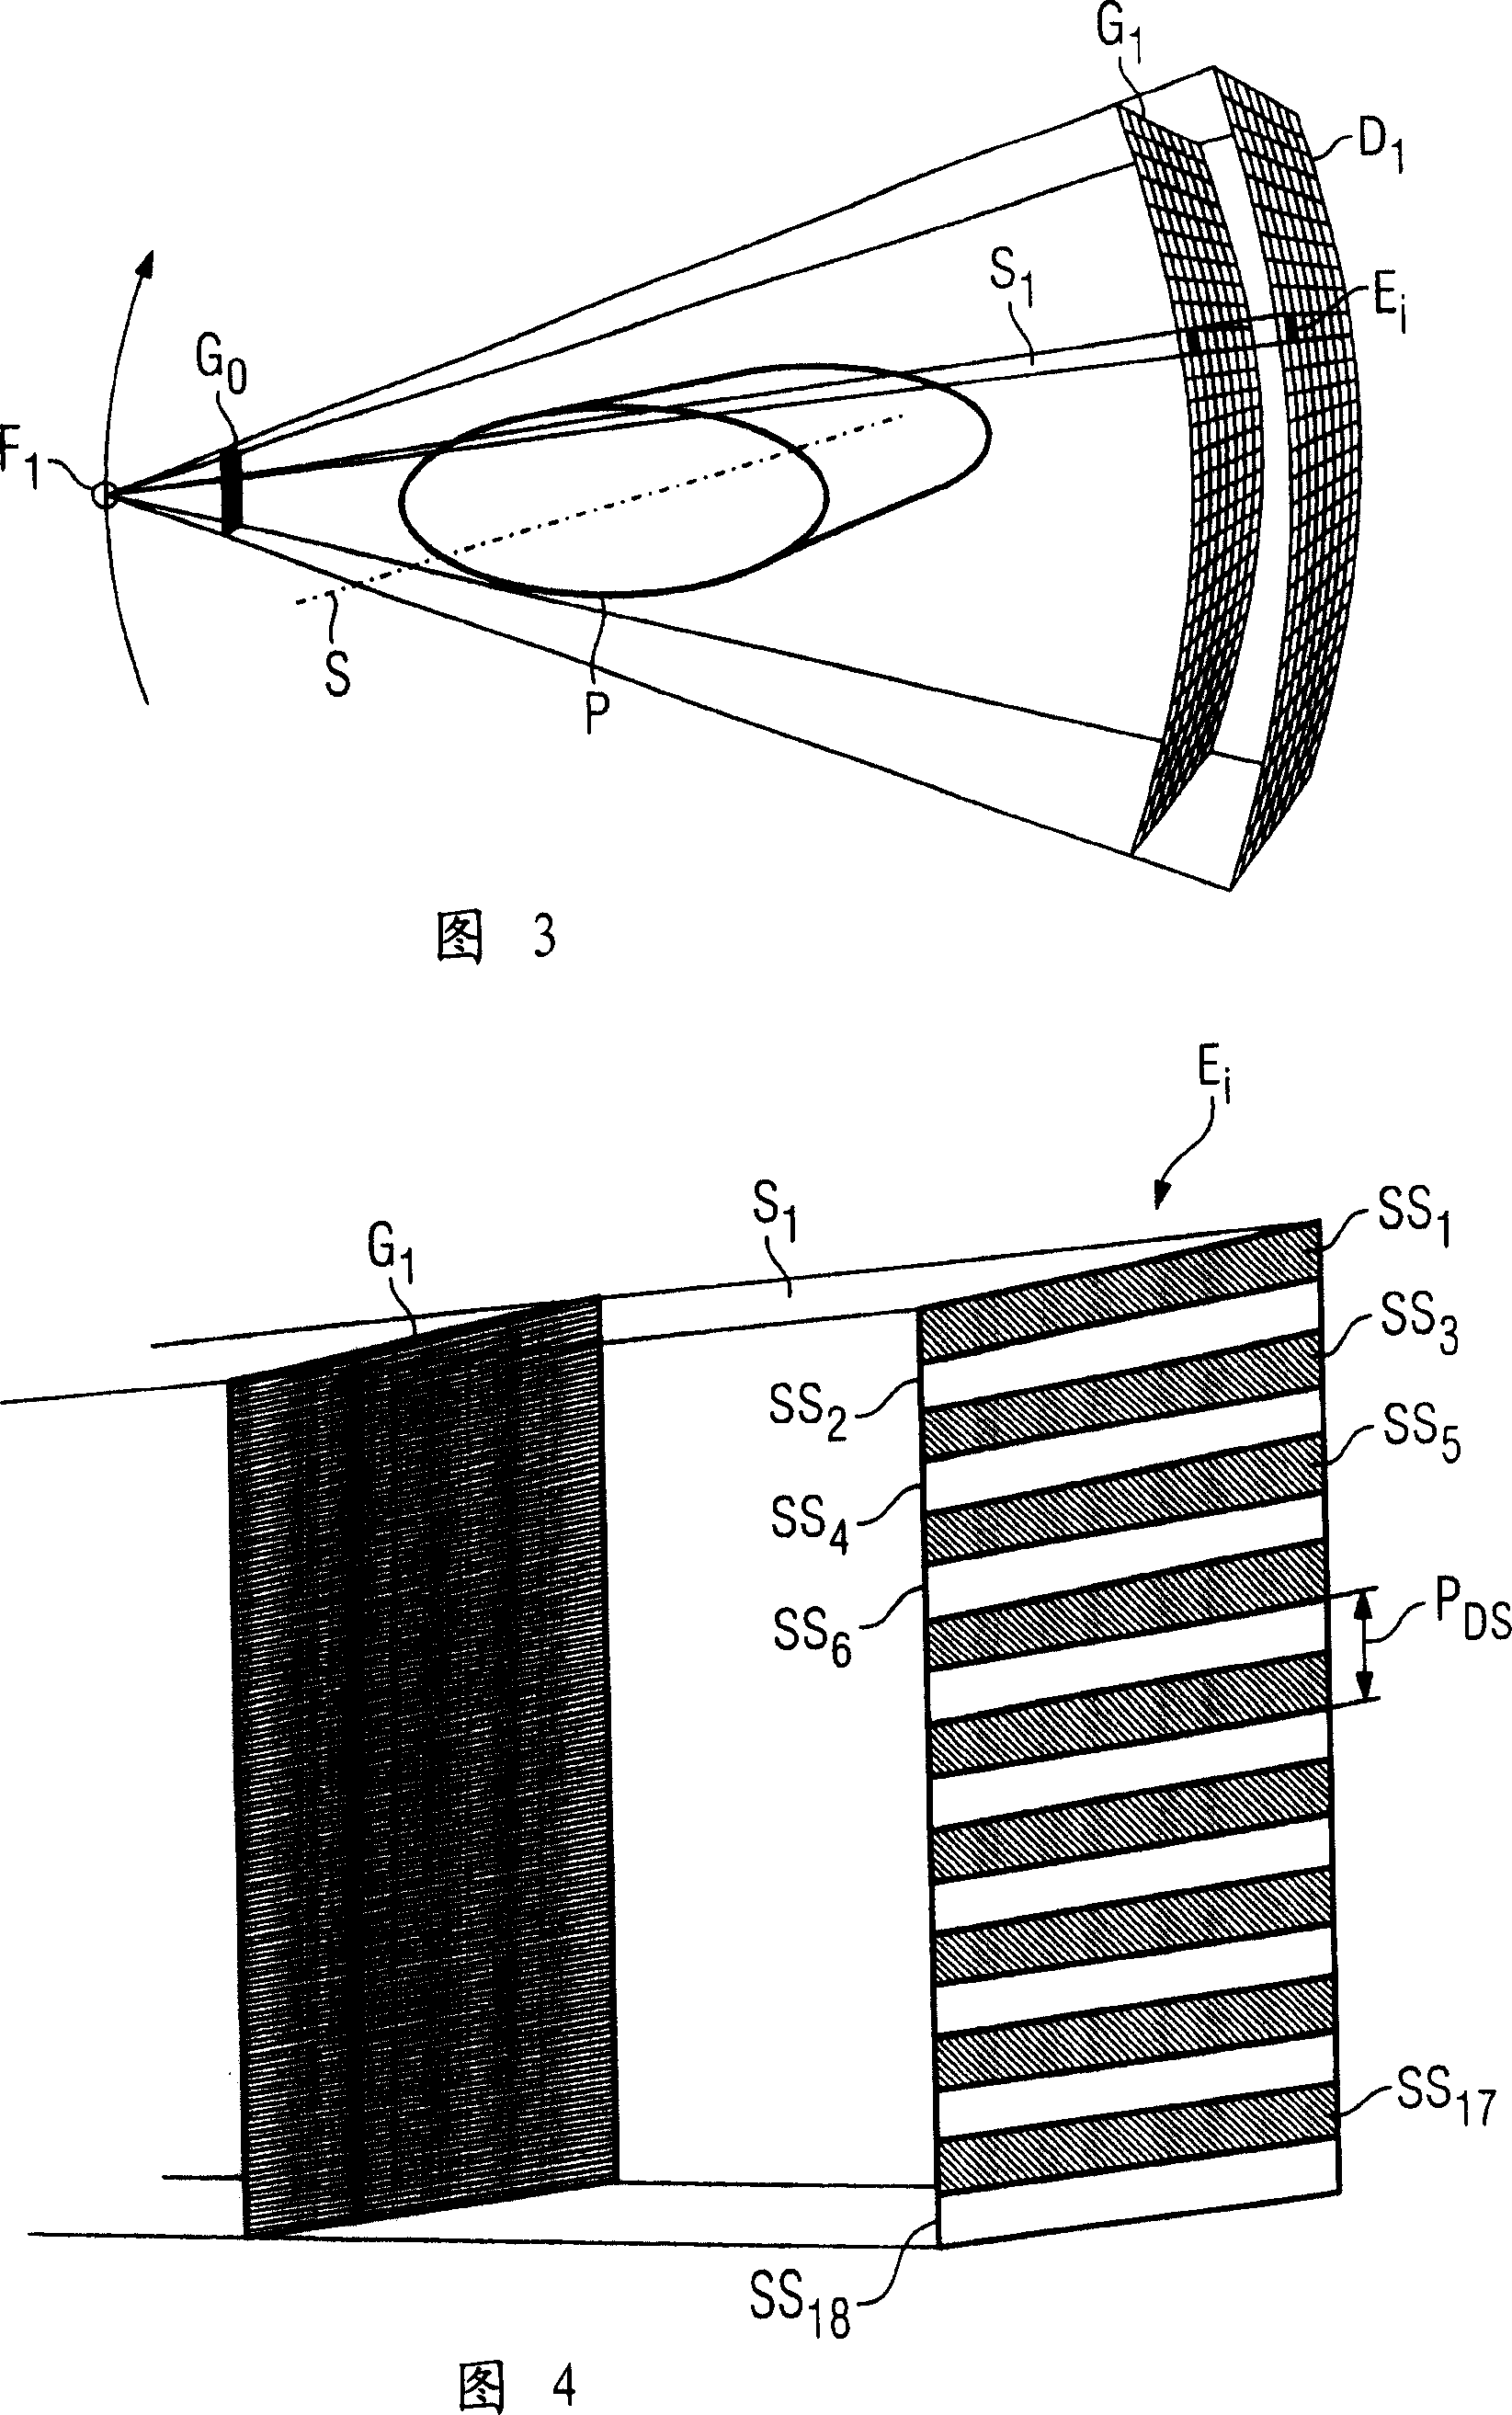 Method and CT system for detecting and differentiating plaque in vessel structures of a patient